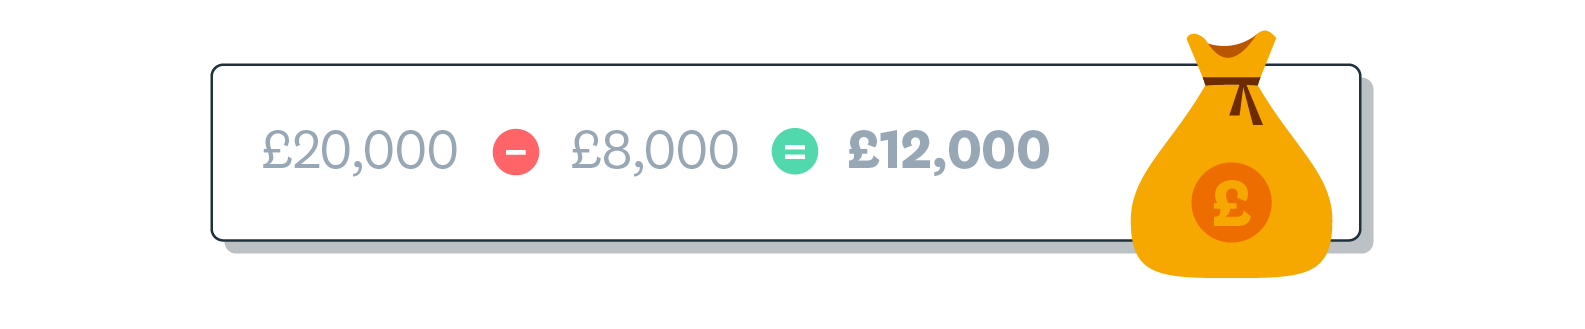 Example shows £20,000 minus £8,000 equals £12,000.